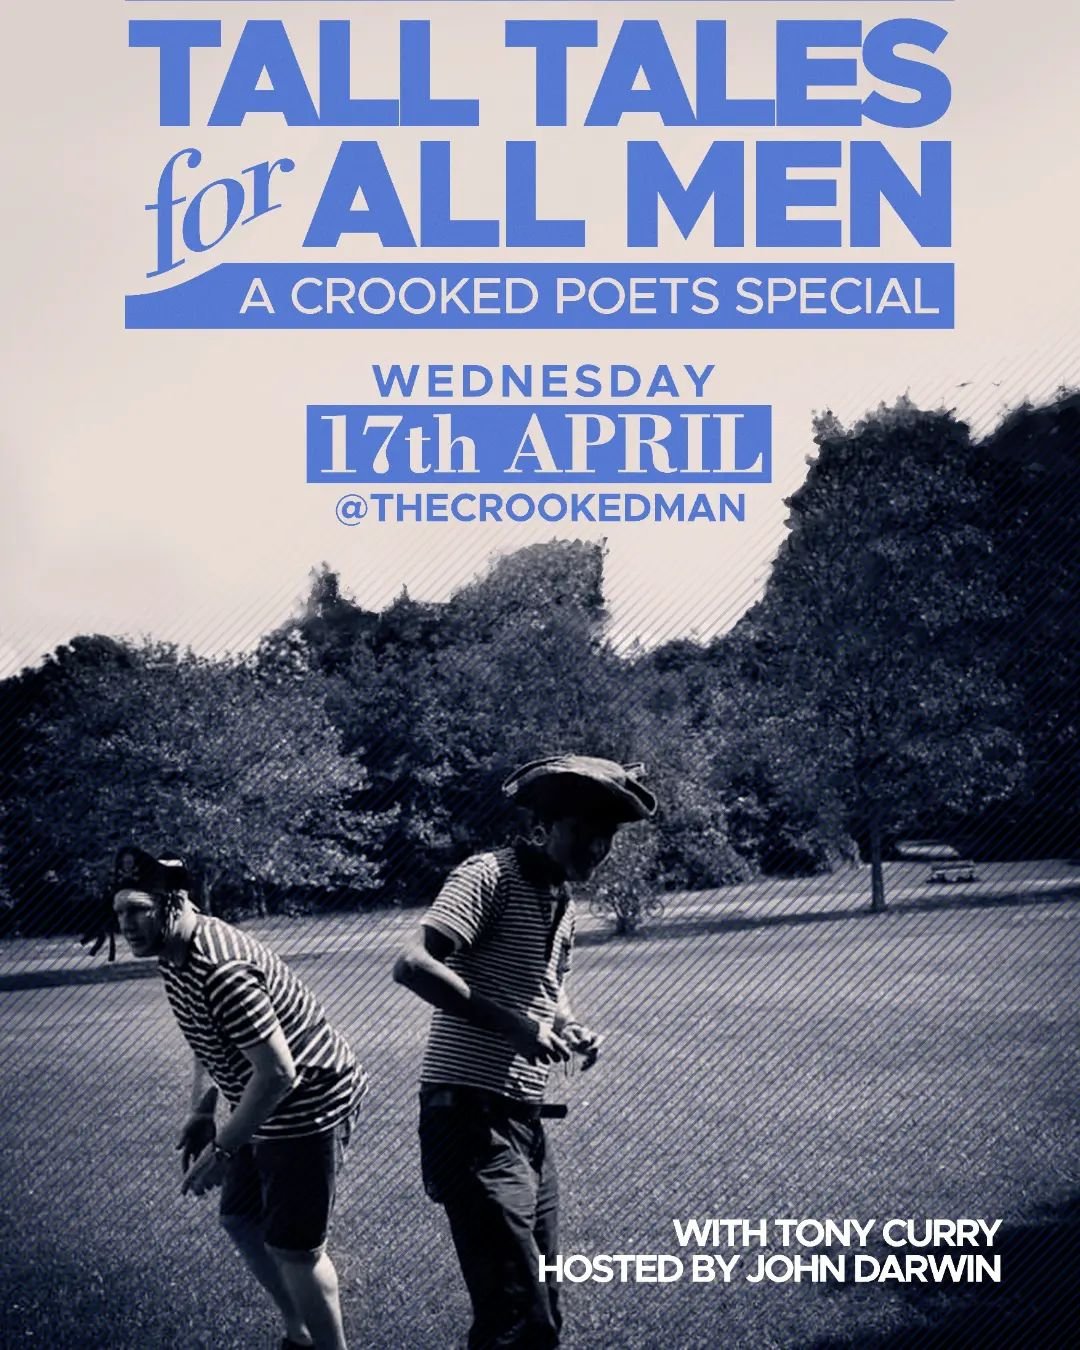 We've got a Crooked Poets special on Wednesday 17th April when renowned poet @tonysheppard86 (Tony Curry) brings his 'Tall Tales for All Men' show to Prestwich. @darwinpoet is on hosting duties.